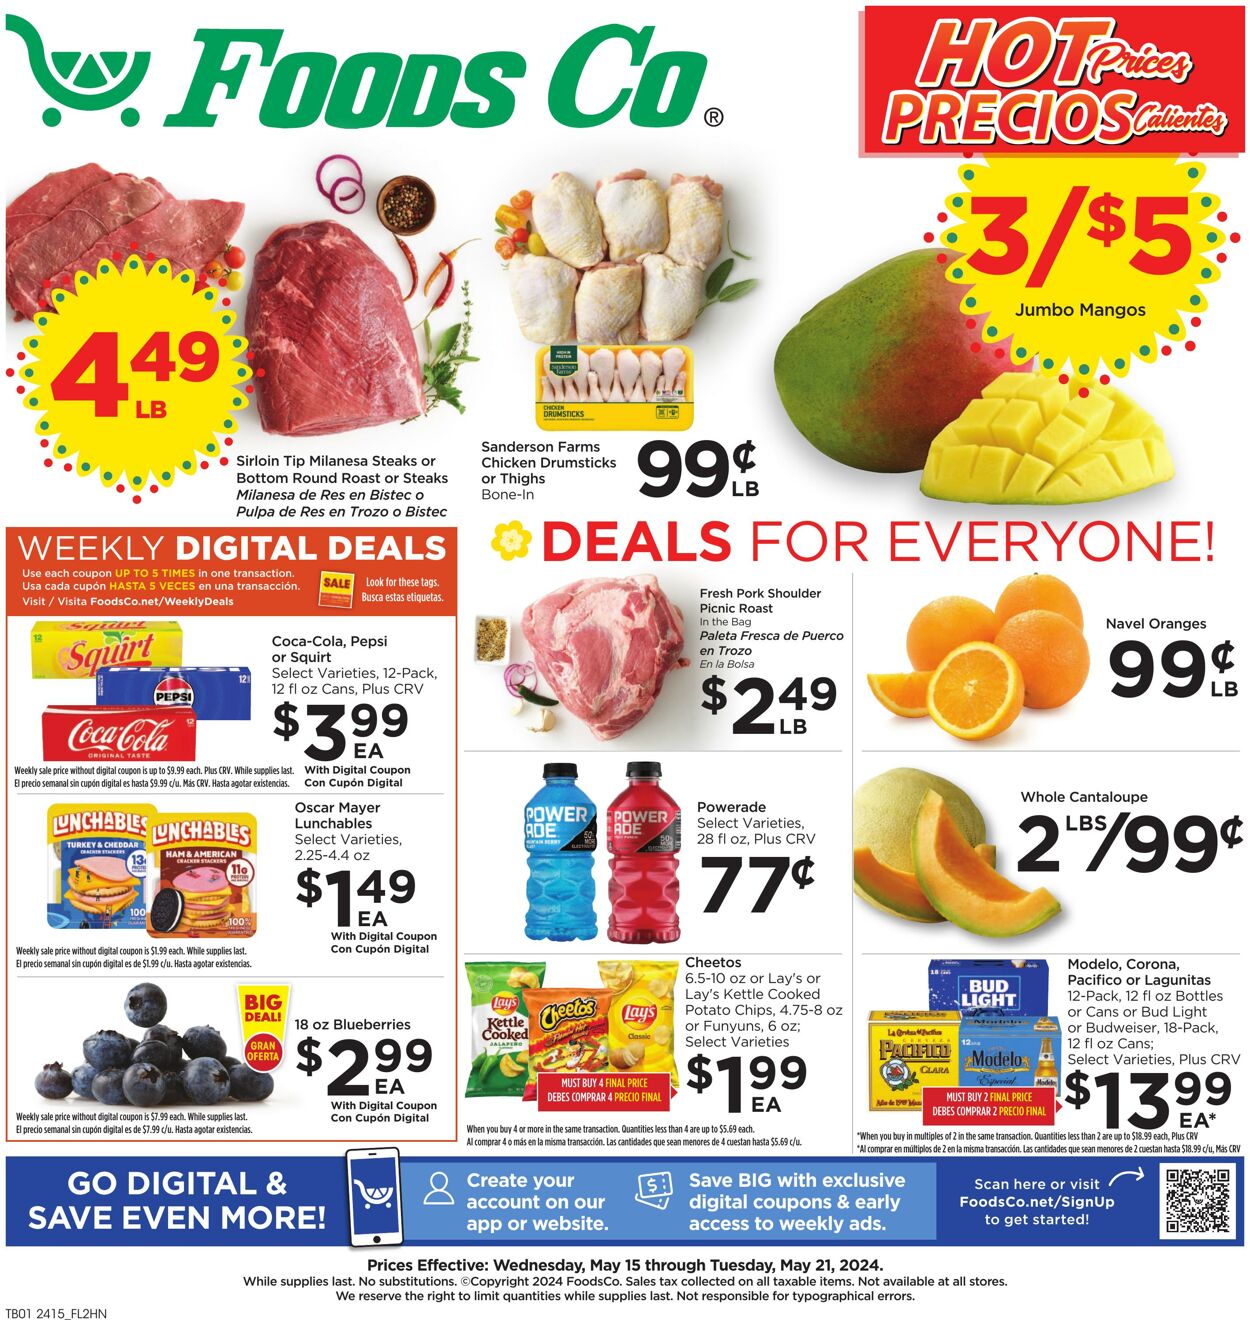 Foods Co Promotional weekly ads